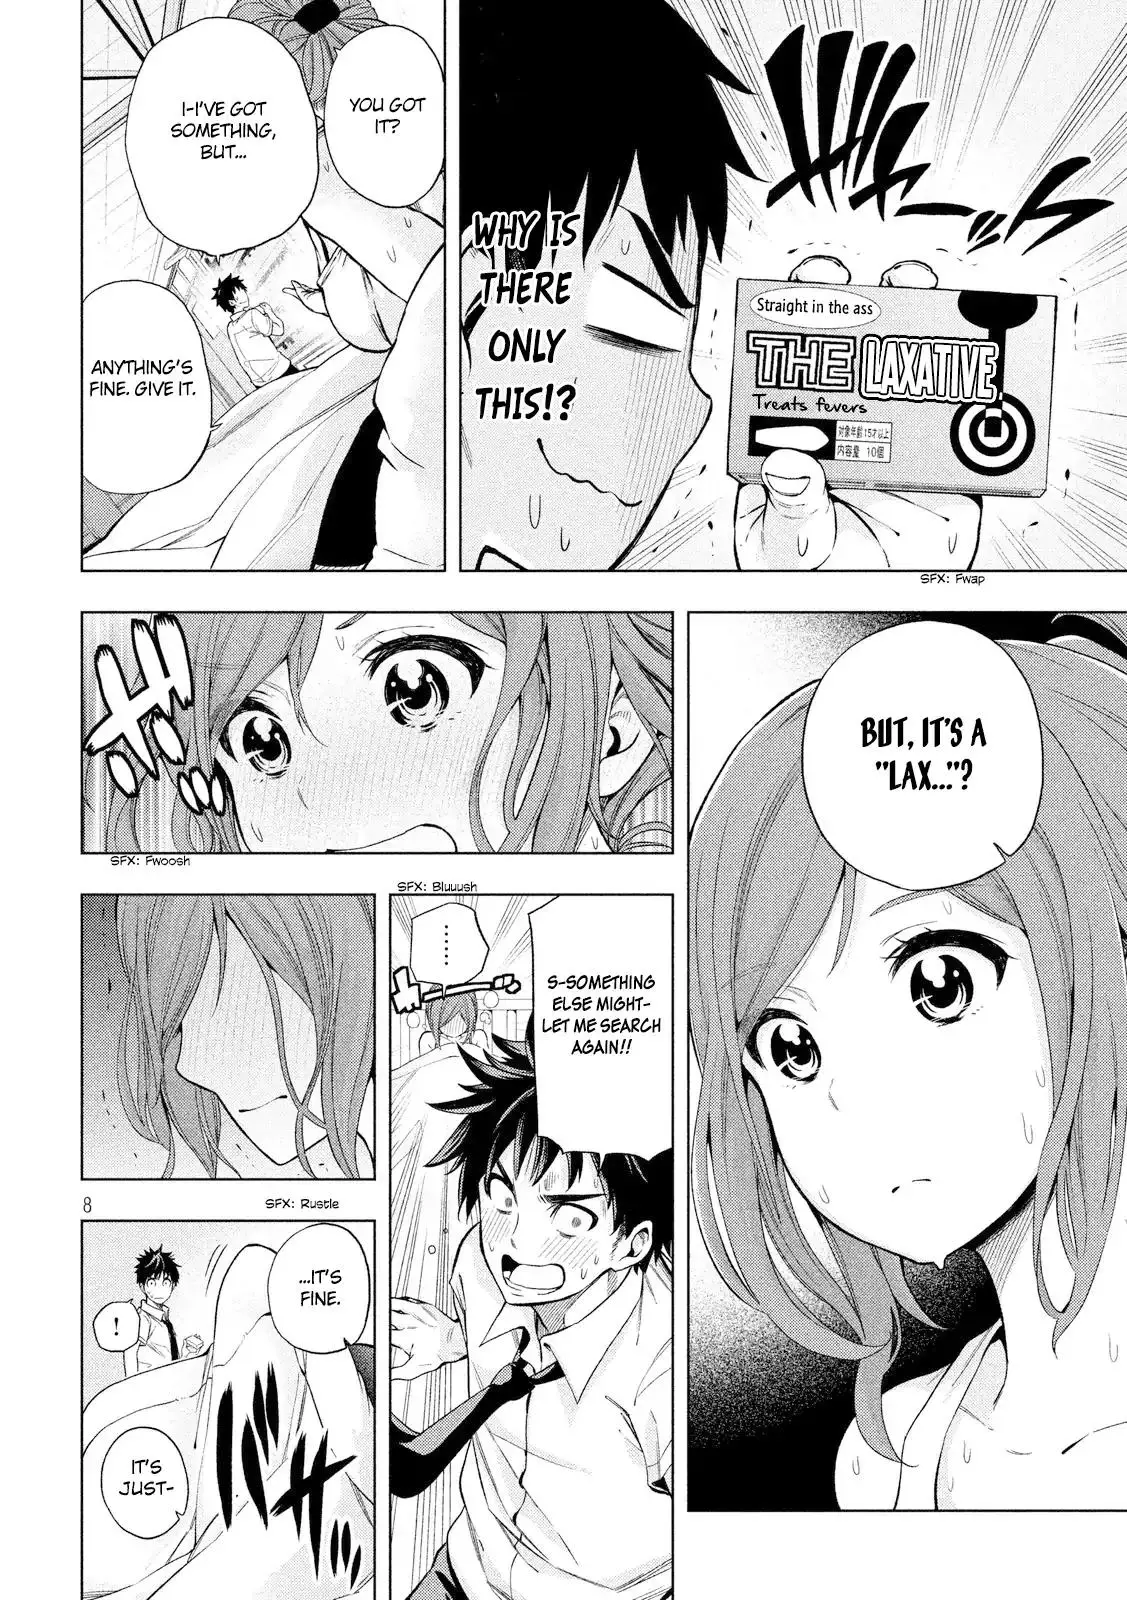 Why are you here Sensei!? - 2 page 8